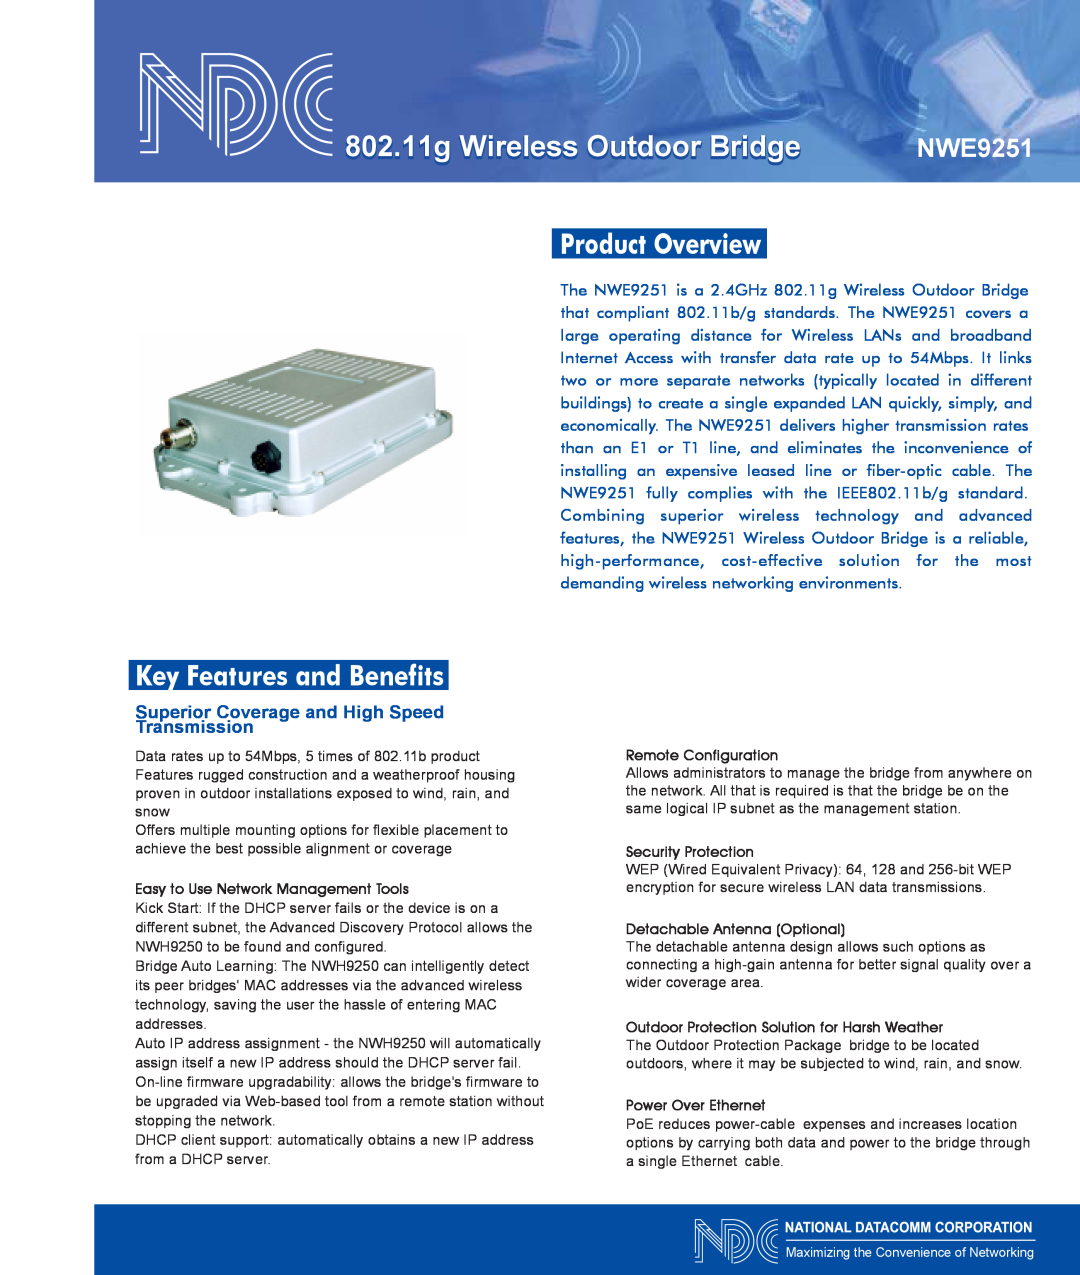 NDC comm NWE9251 manual 802.11g Wireless Outdoor Bridge, Product Overview, Key Features and Benefits, Remote Configuration 